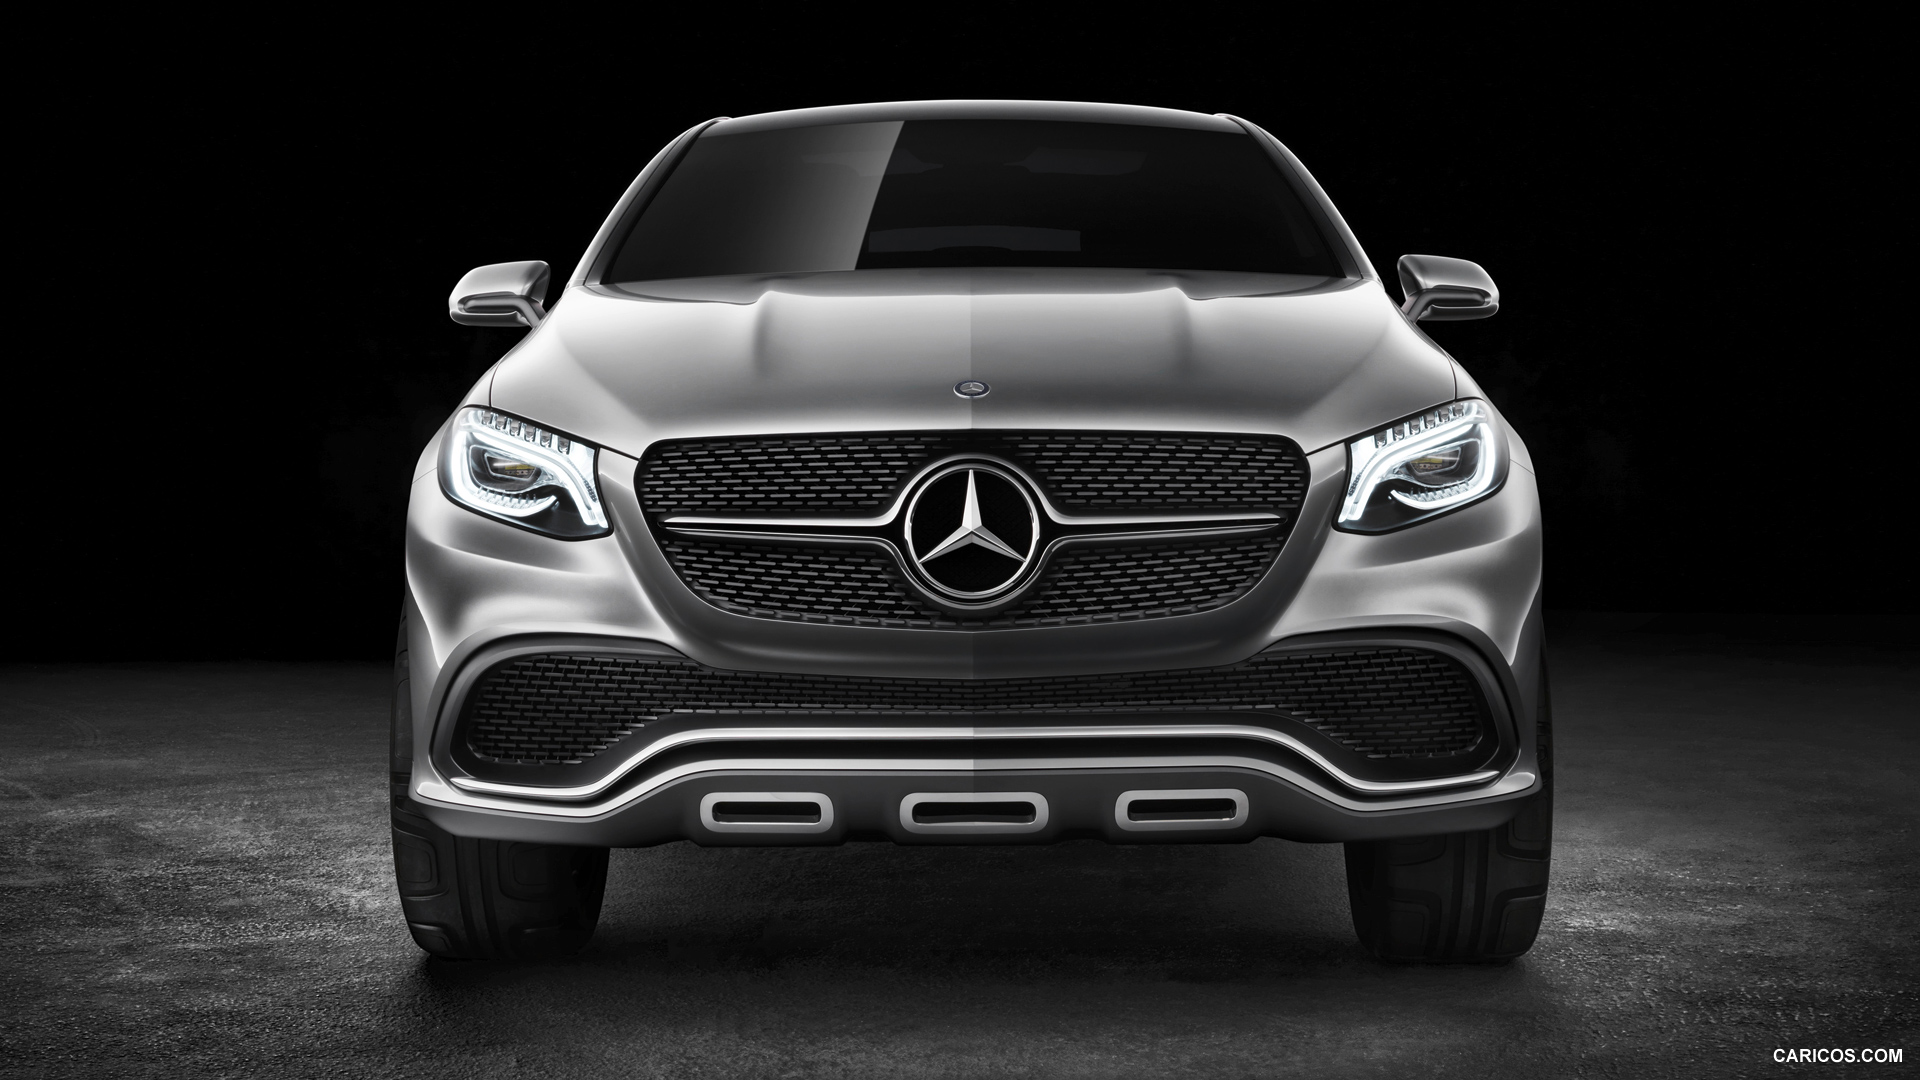 2014 Mercedes-Benz Coupe SUV Concept  - Front, #13 of 17